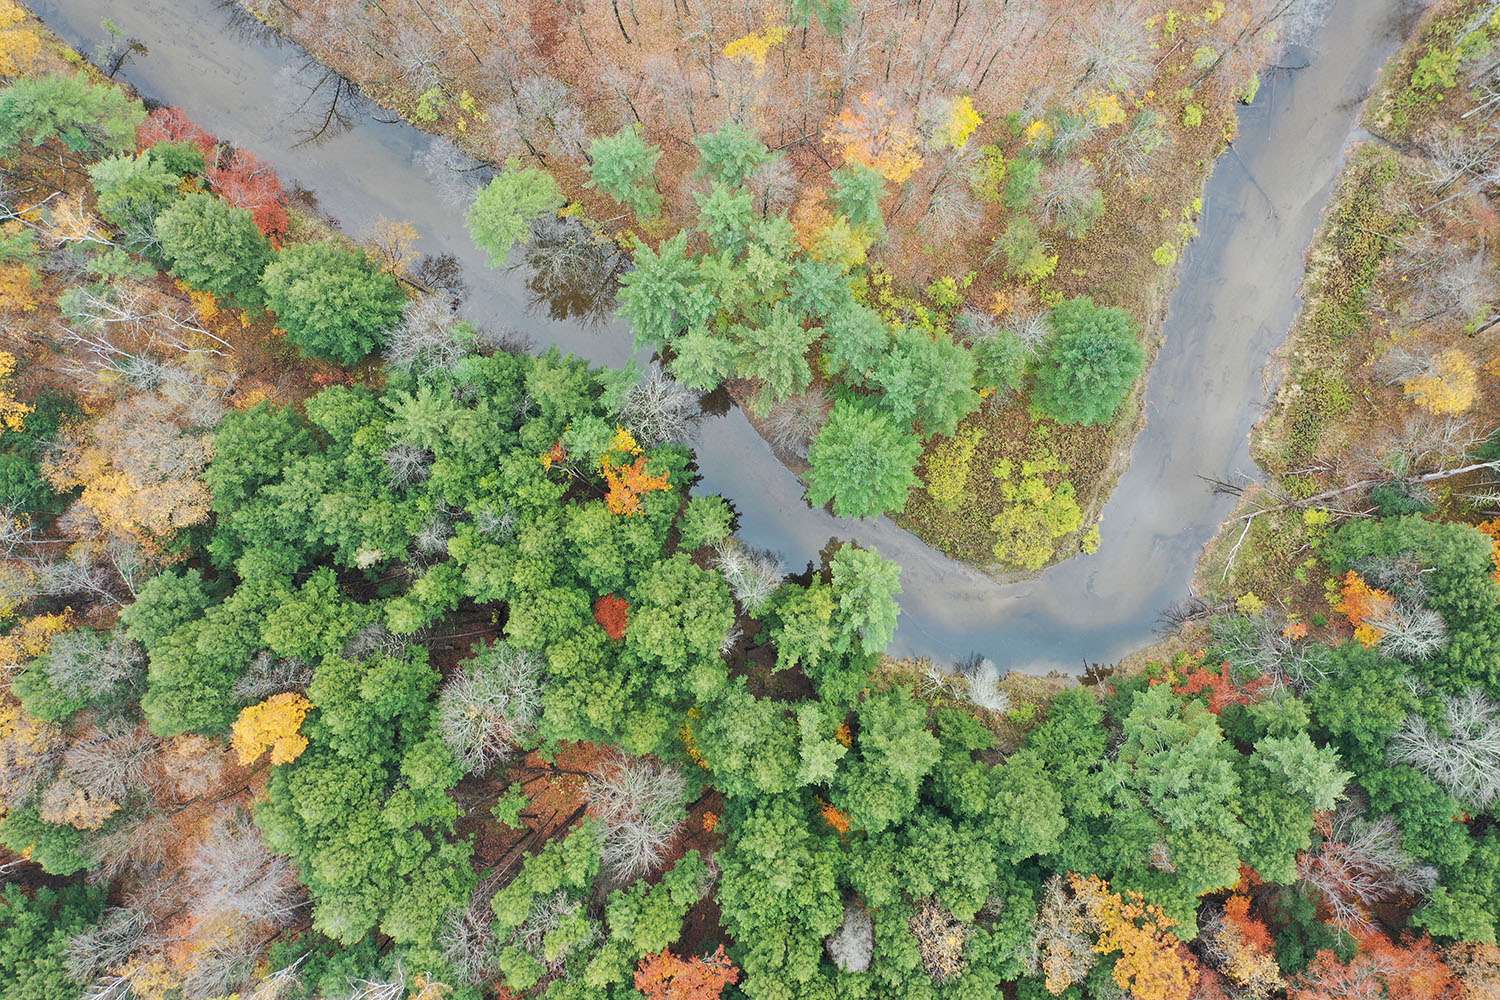 Aerial view of intact forests along the North Branch of the Boquet River on the Ben Wever Farm property, now protected by a conservation easement in partnership with the Adirondack Land Trust. © Adirondack Land Trust/Becca Halter